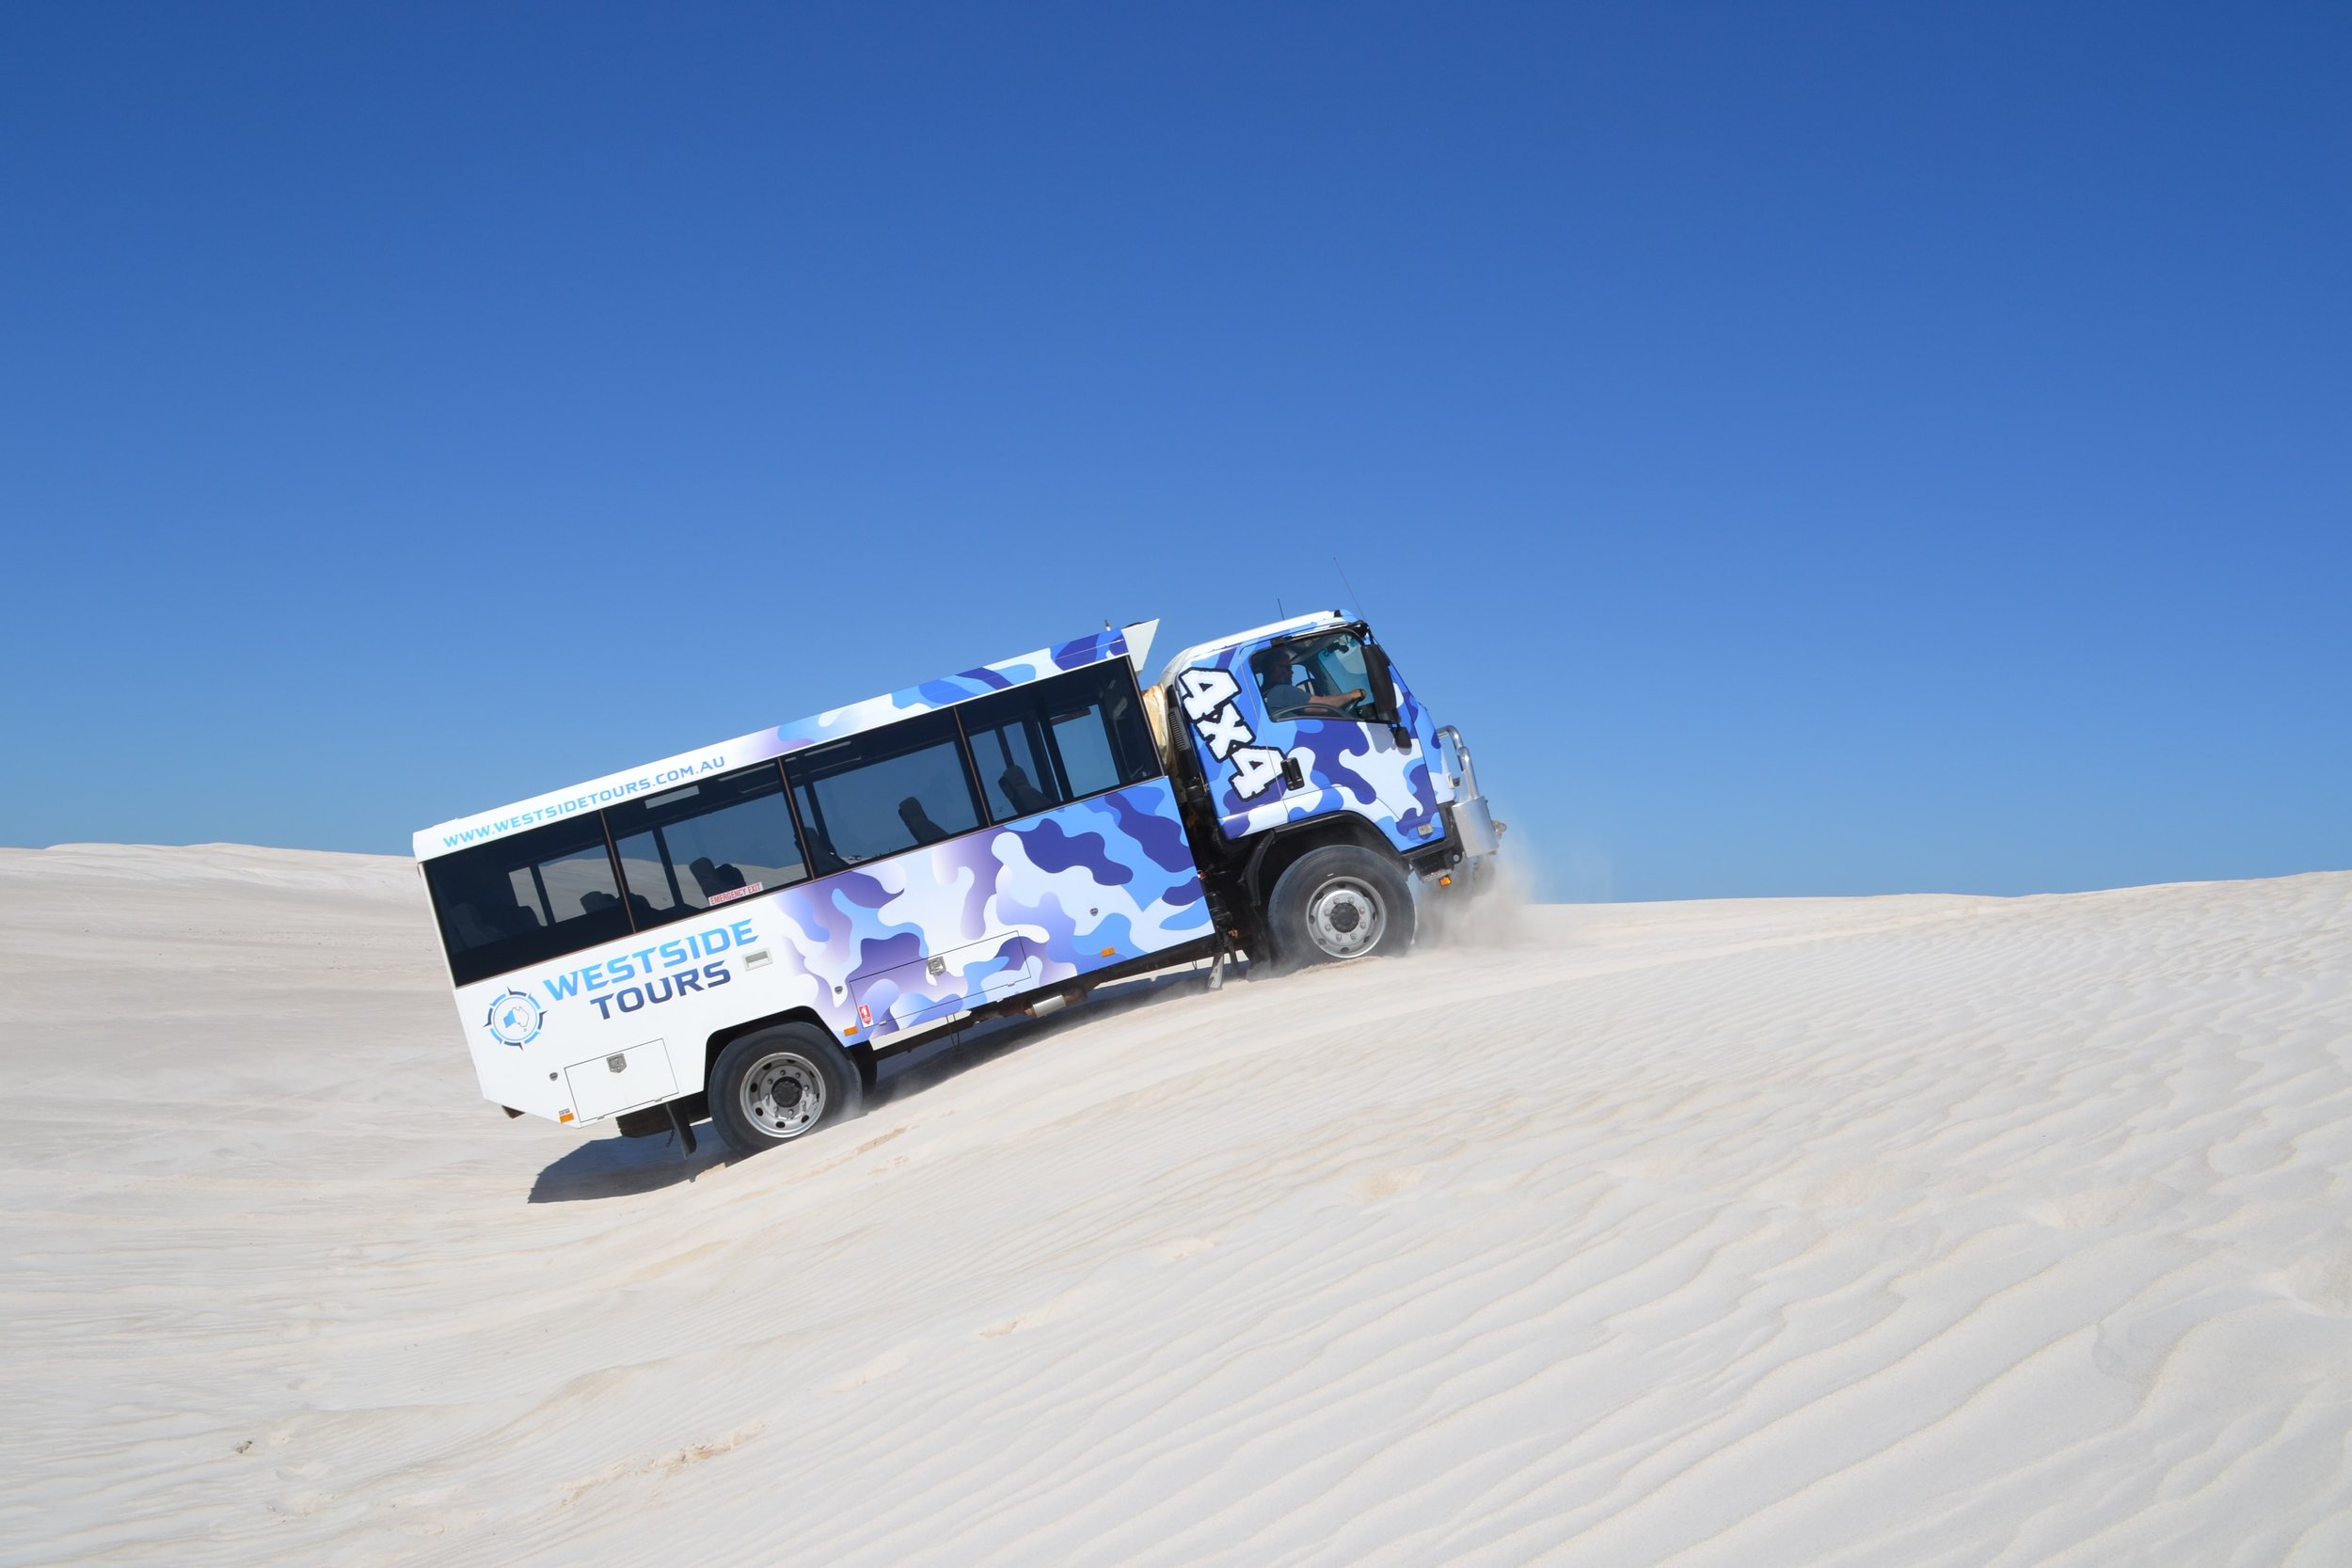 Our 4wd bus for the 4wd adventure in lancelin 